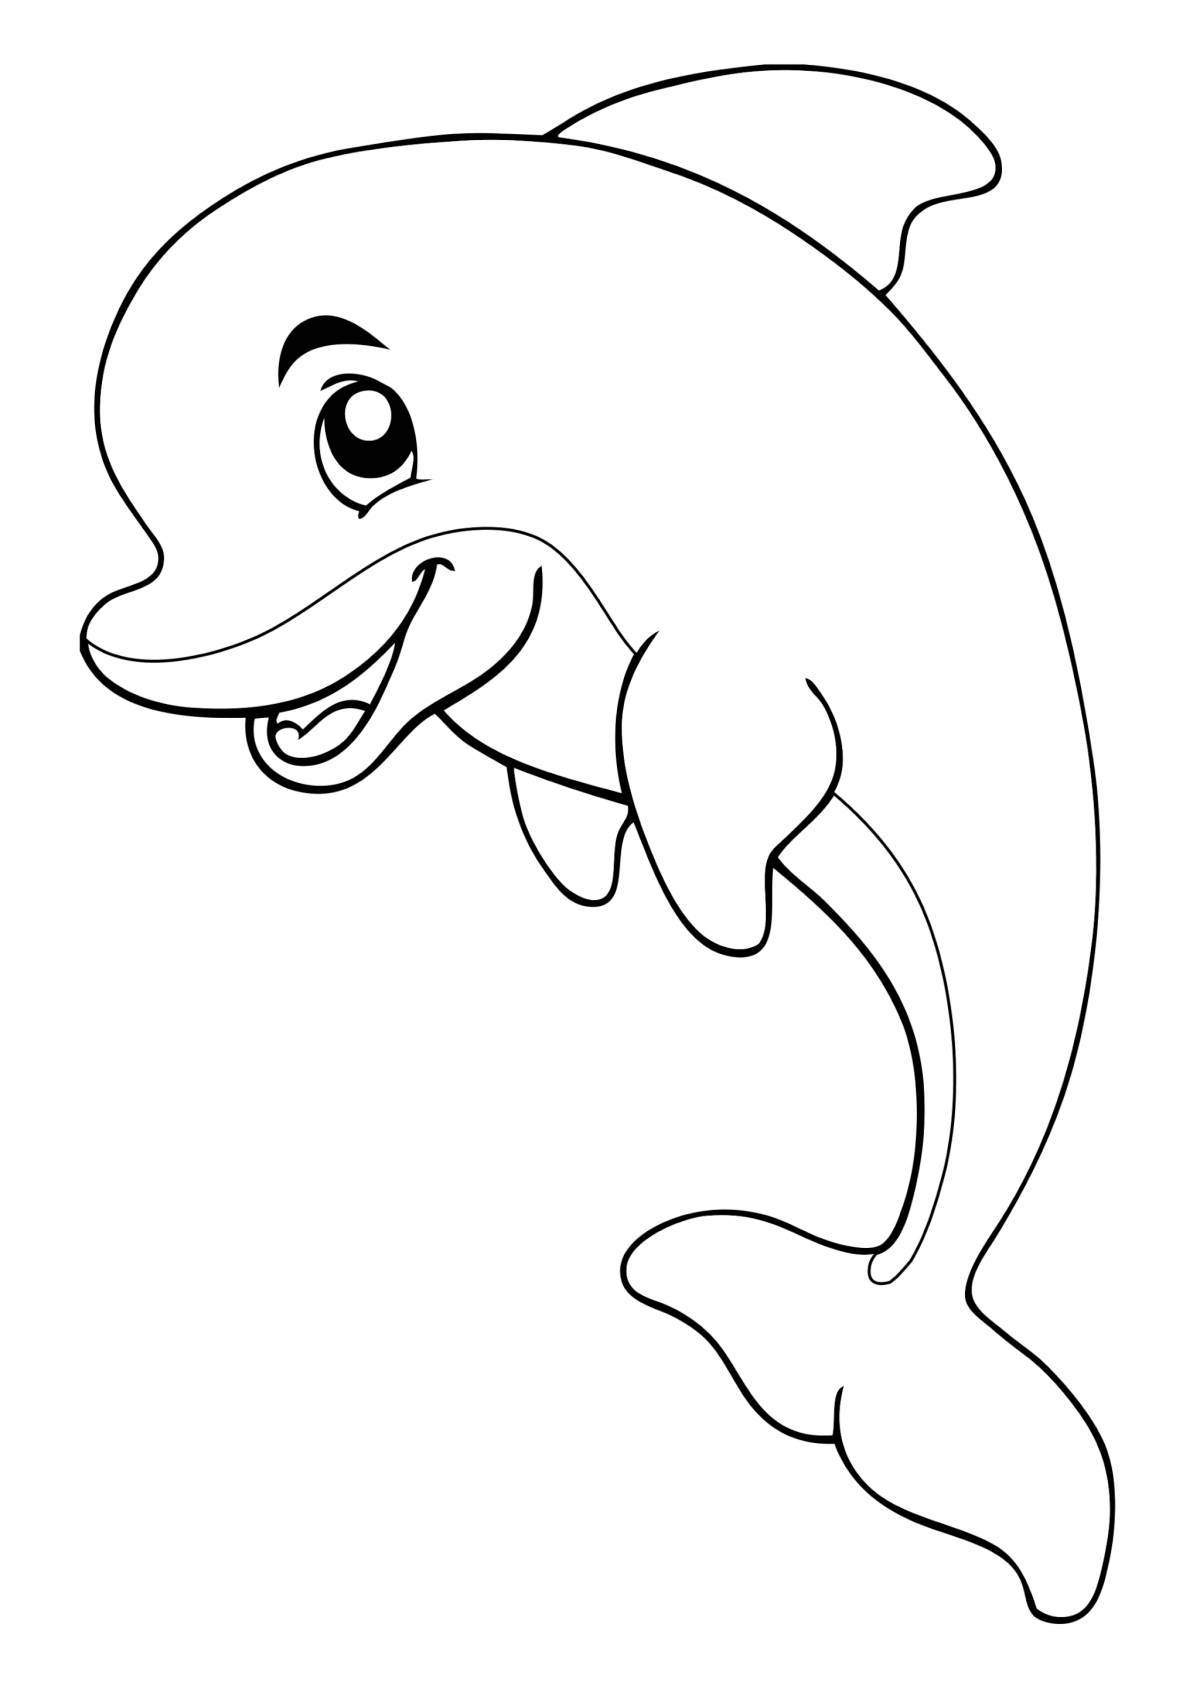 Children's dolphin coloring book